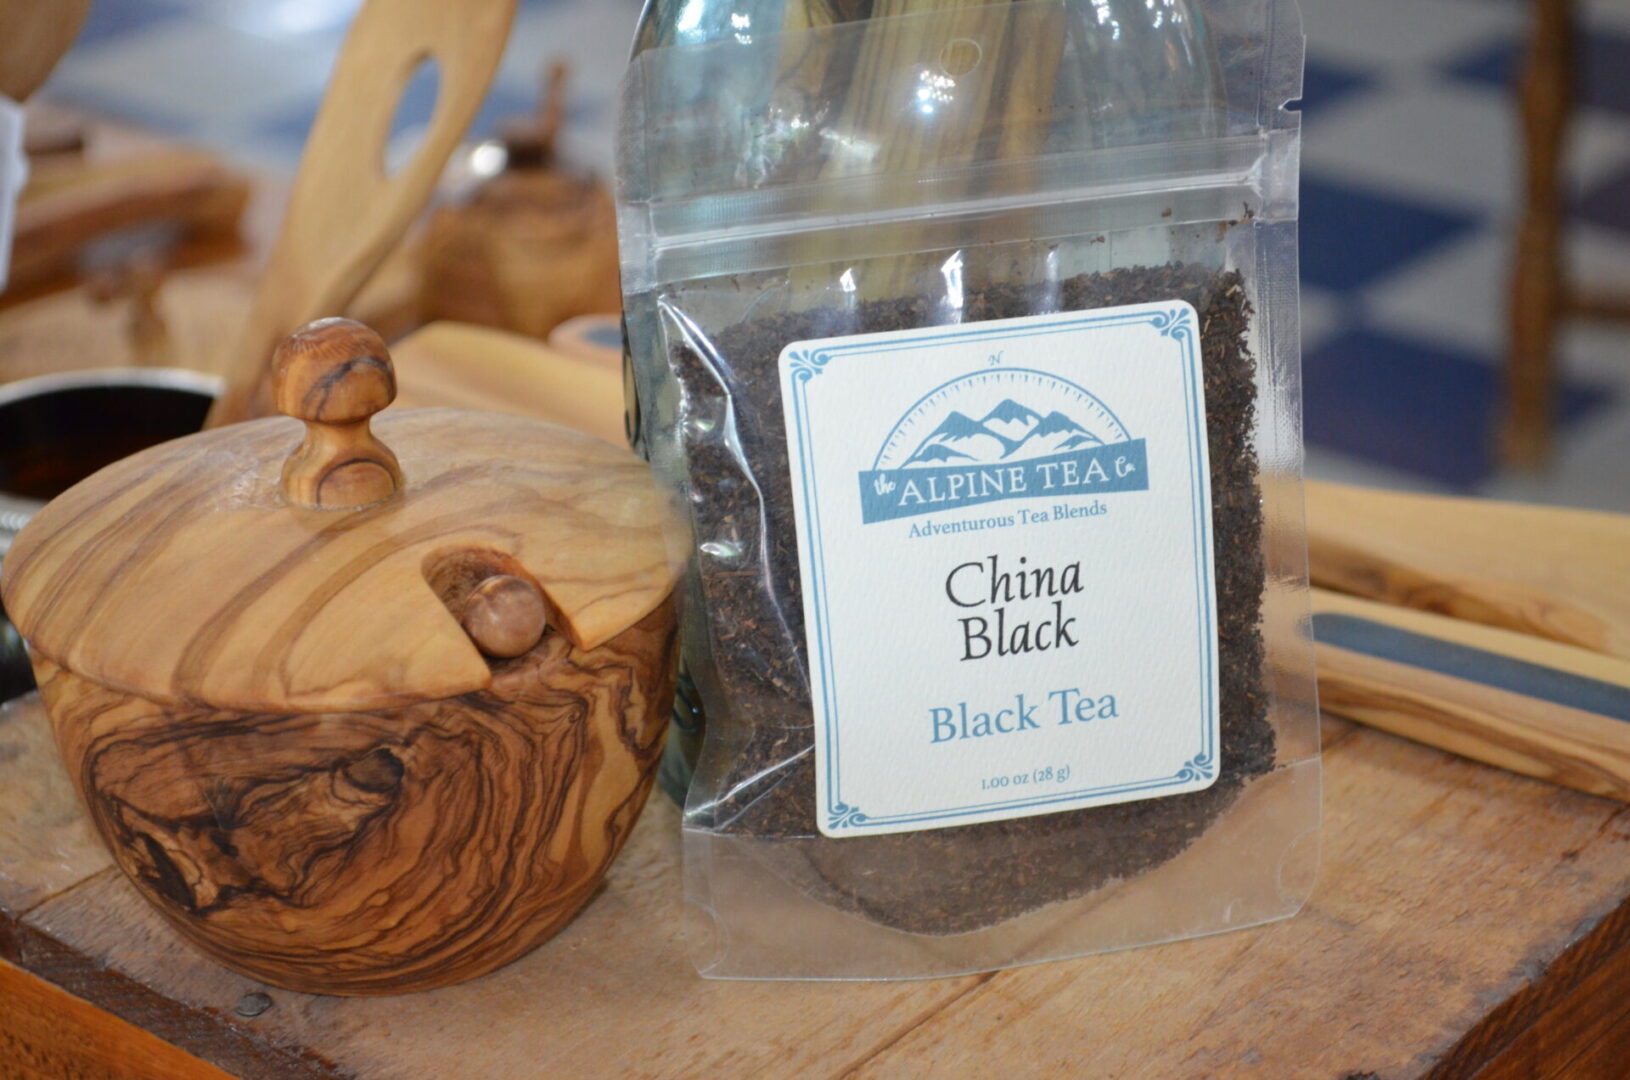 A bag of tea sitting on top of a wooden table.